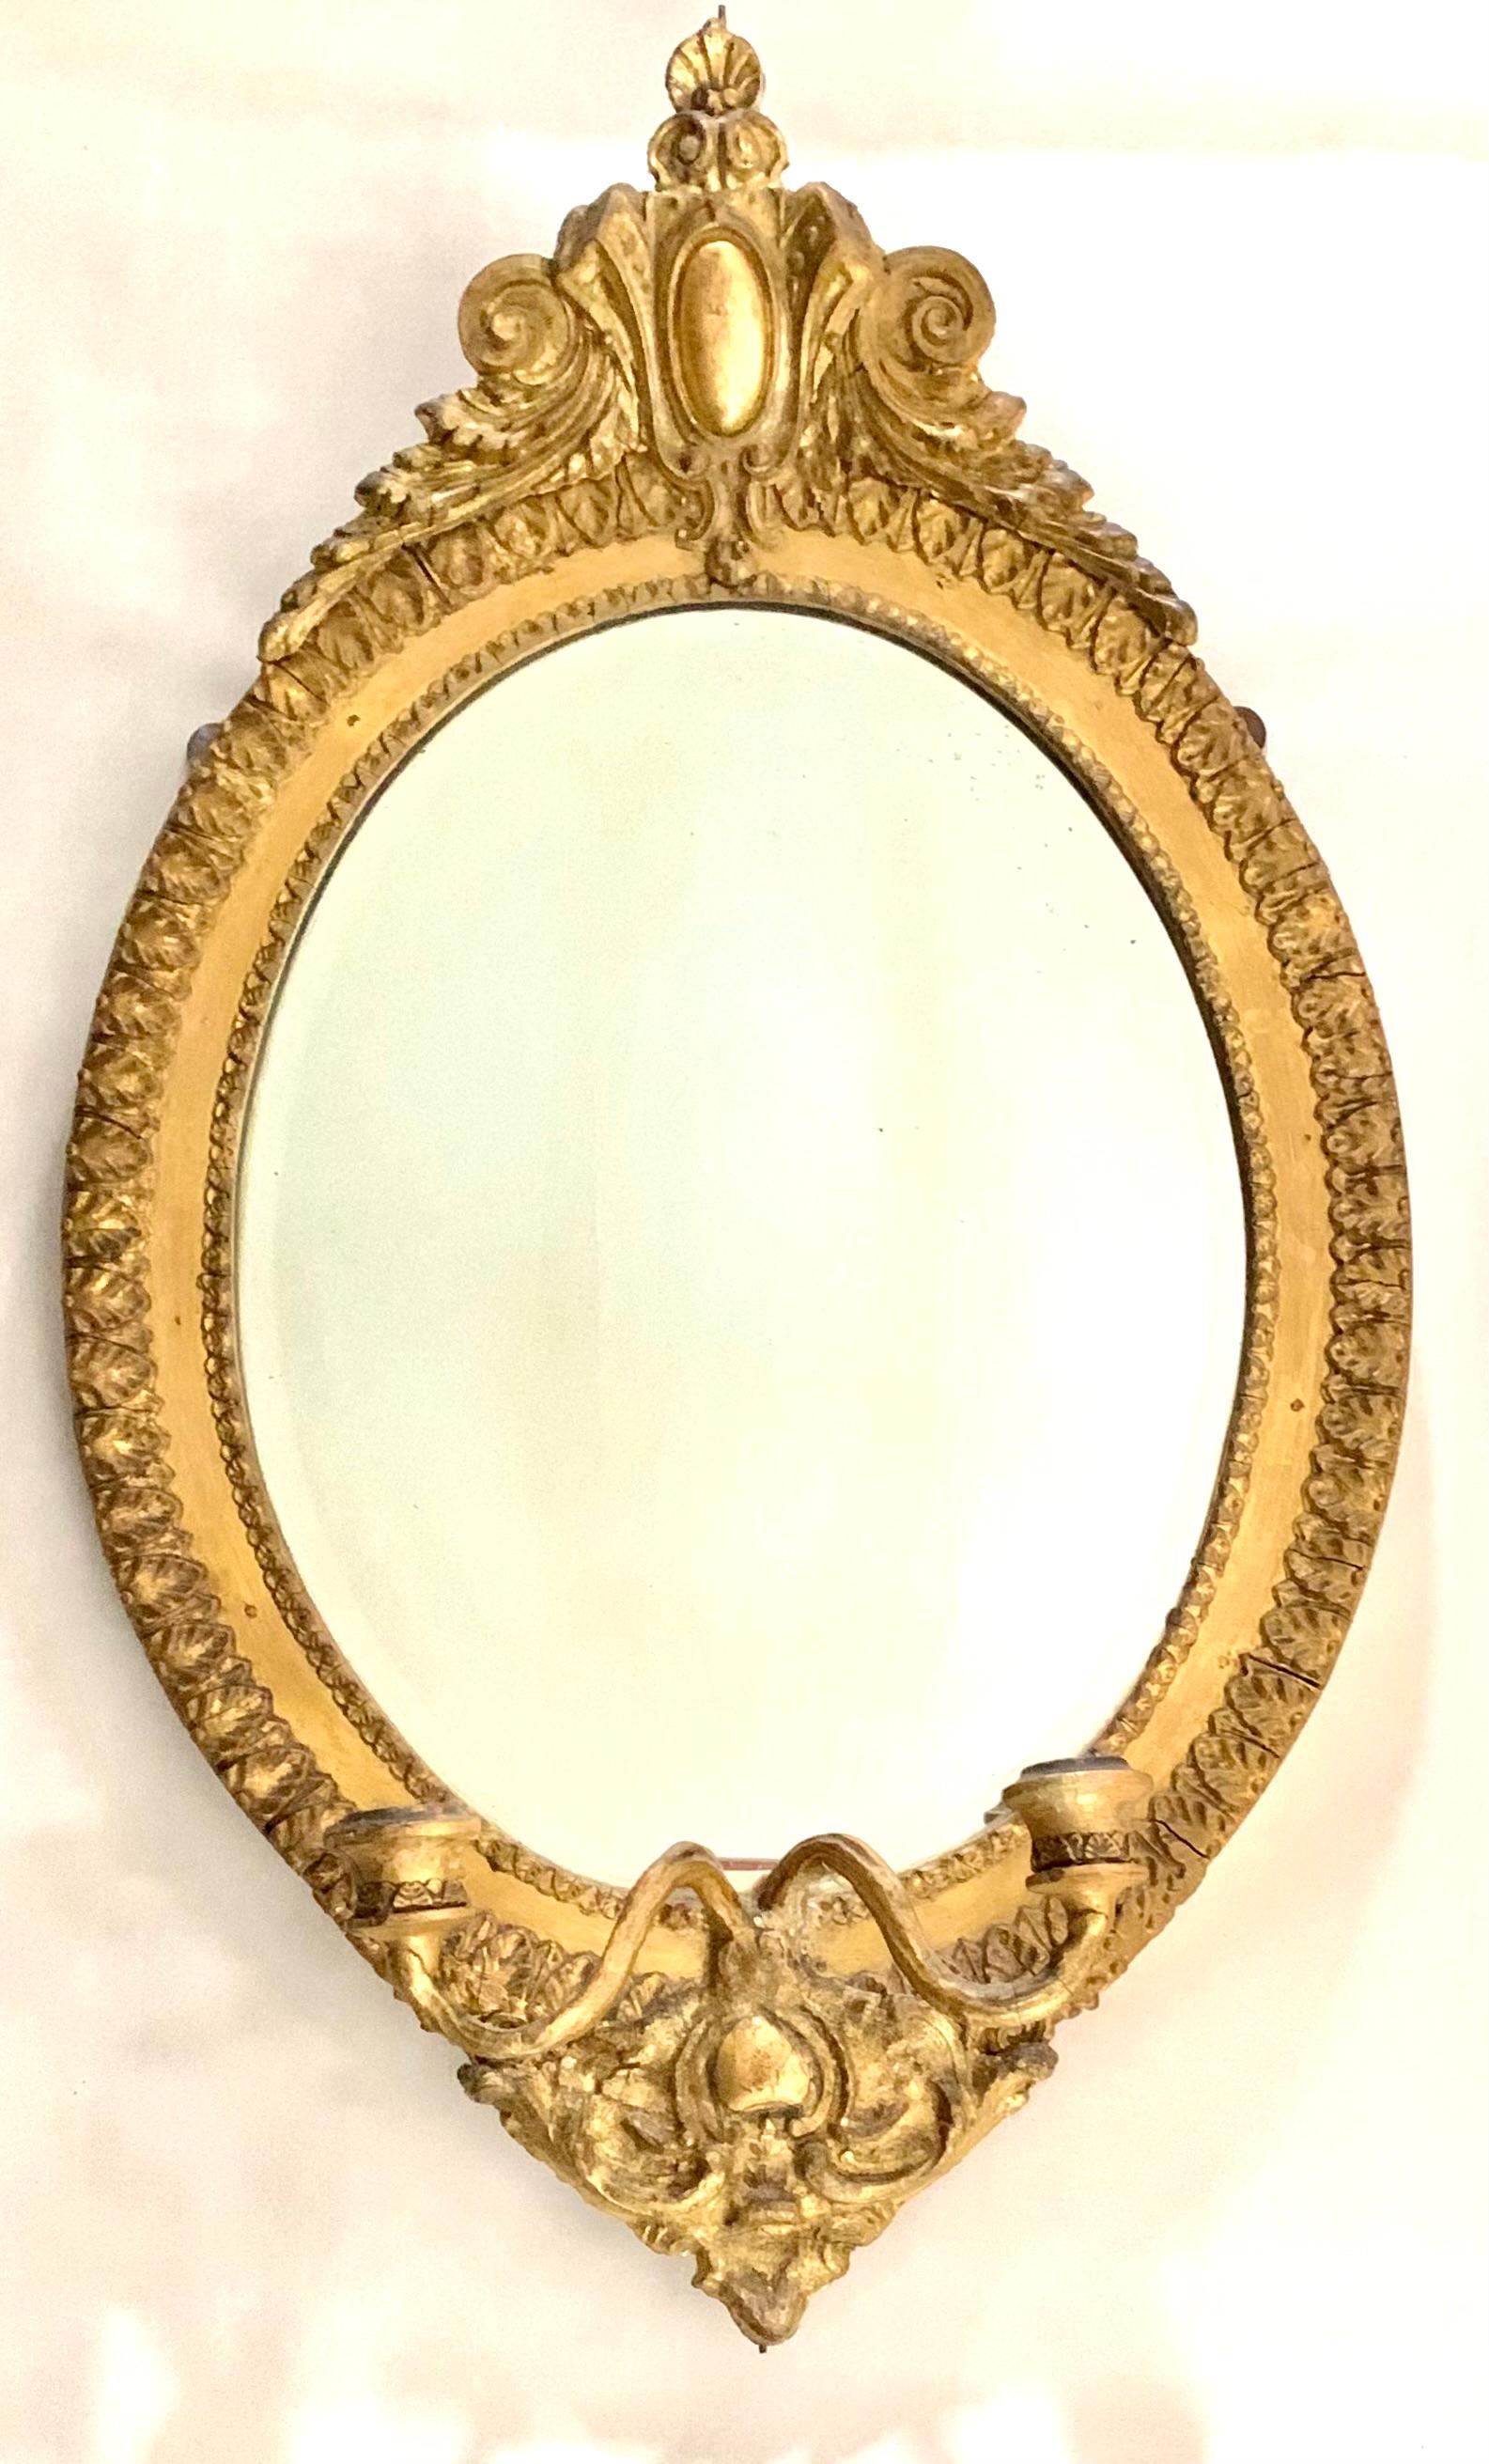 Elegant pair of 19th century Continental Neoclassical style giltwood oval girandole mirrors
Each with an acanthus leaf border, the crest centered by an oval medallion topped with a Venus shell and flanked by attractive scrolled foliate design